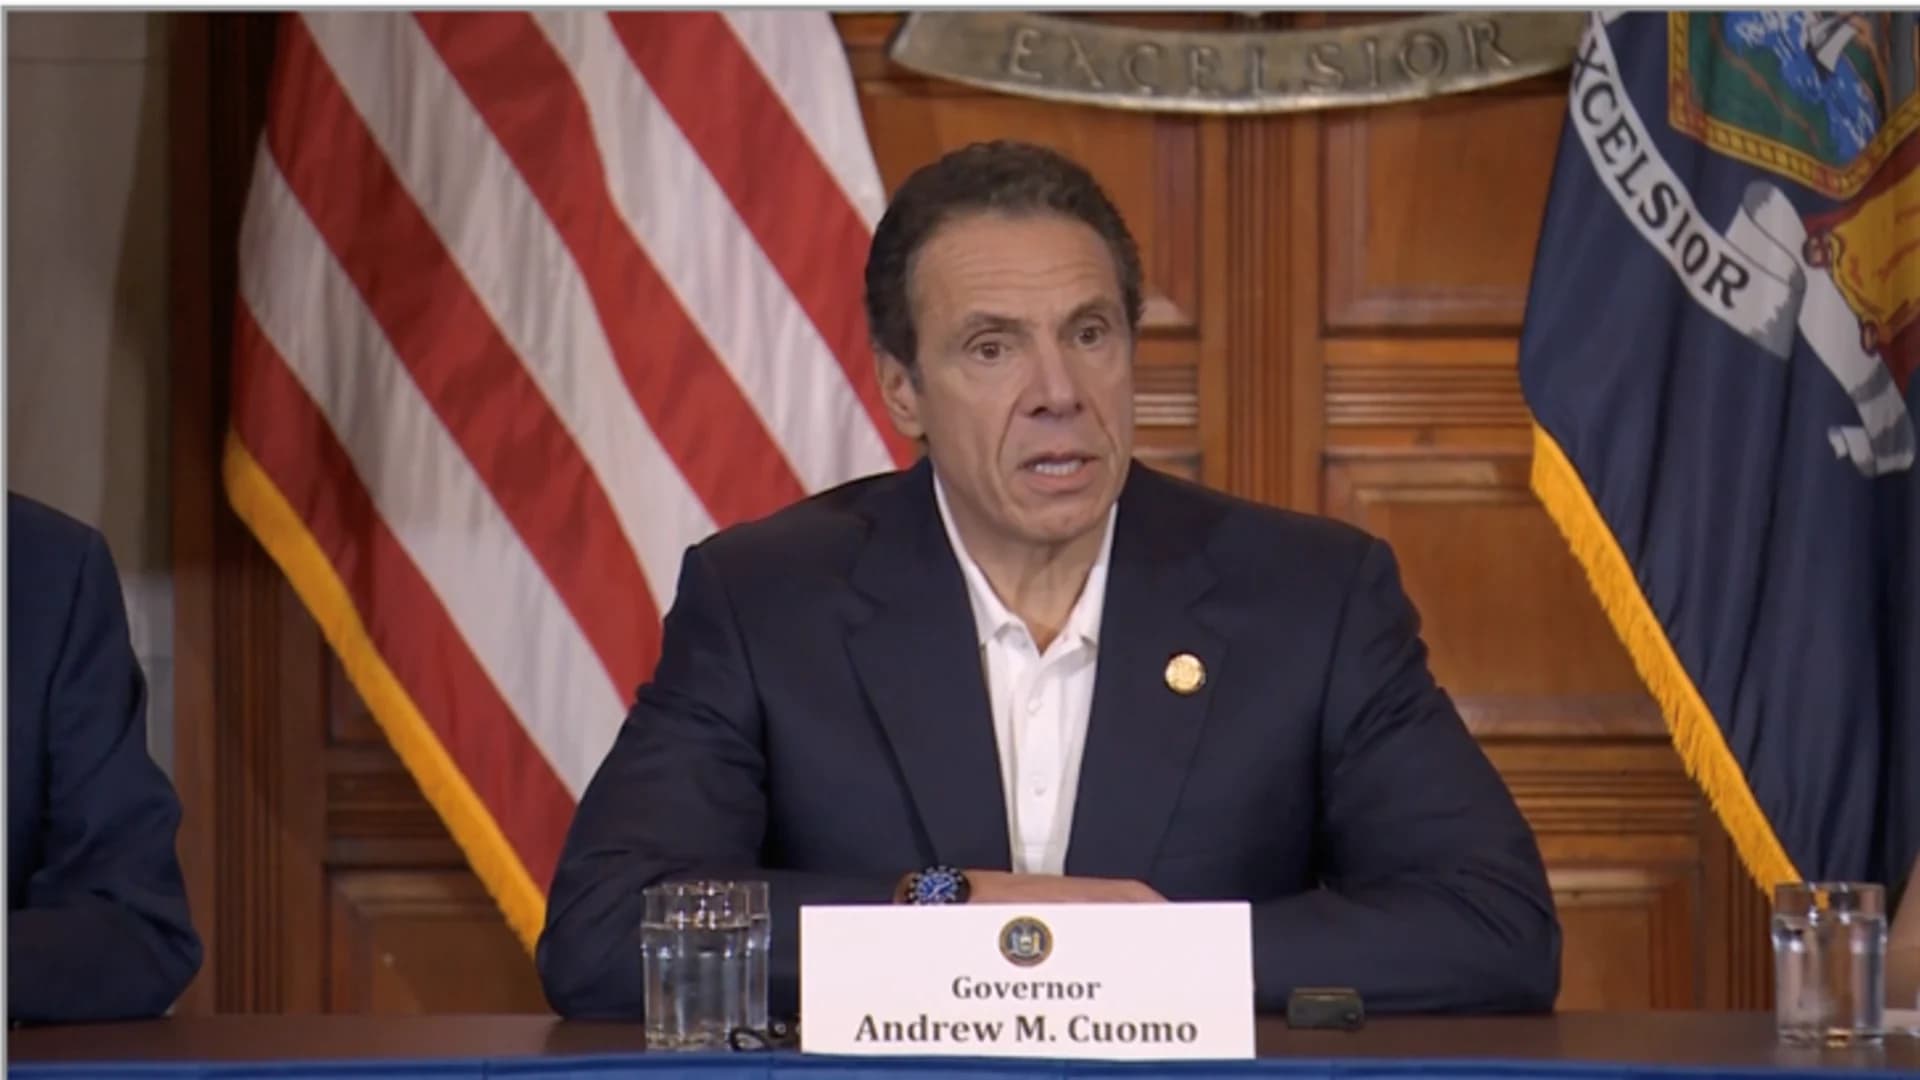 Cuomo announces statewide closures of gyms, bars, movie theaters during press conference